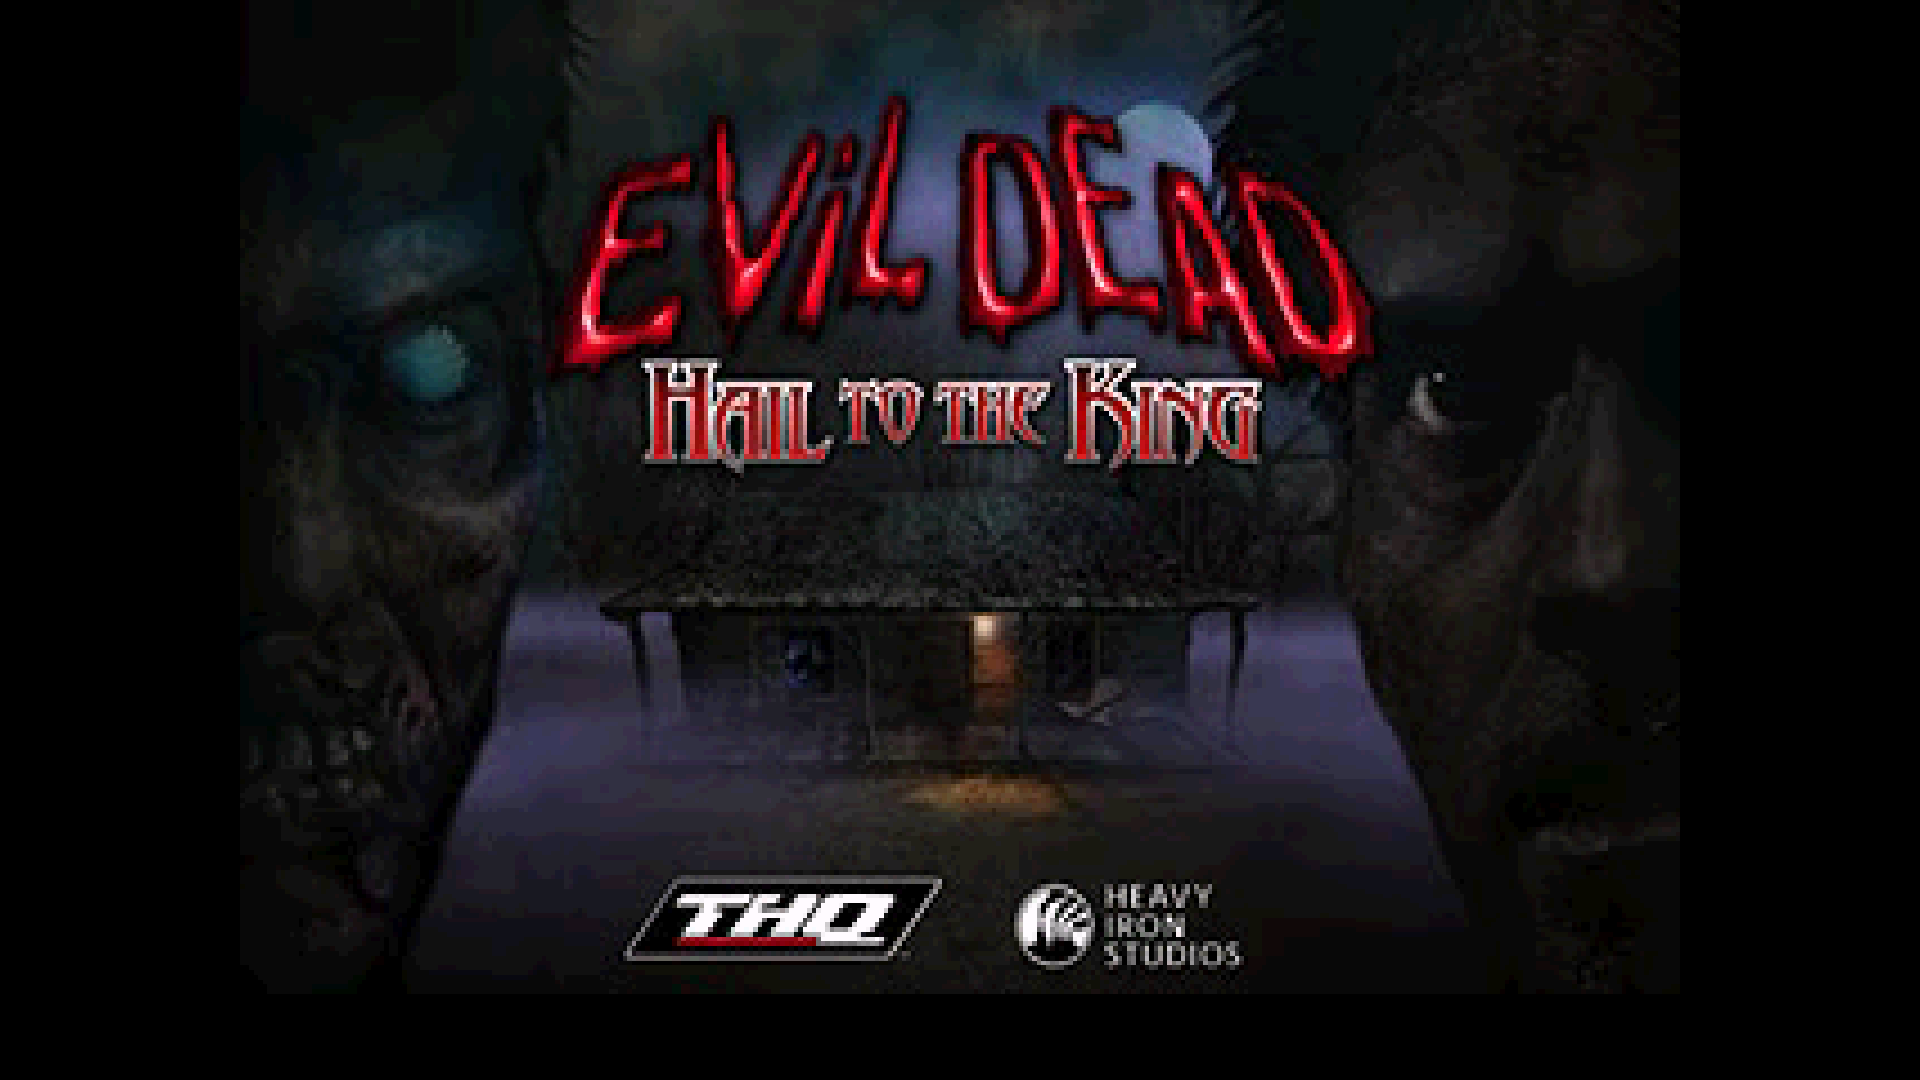 Evil Dead: The Game [PC] Review  Hail To The King, Baby - GameByte